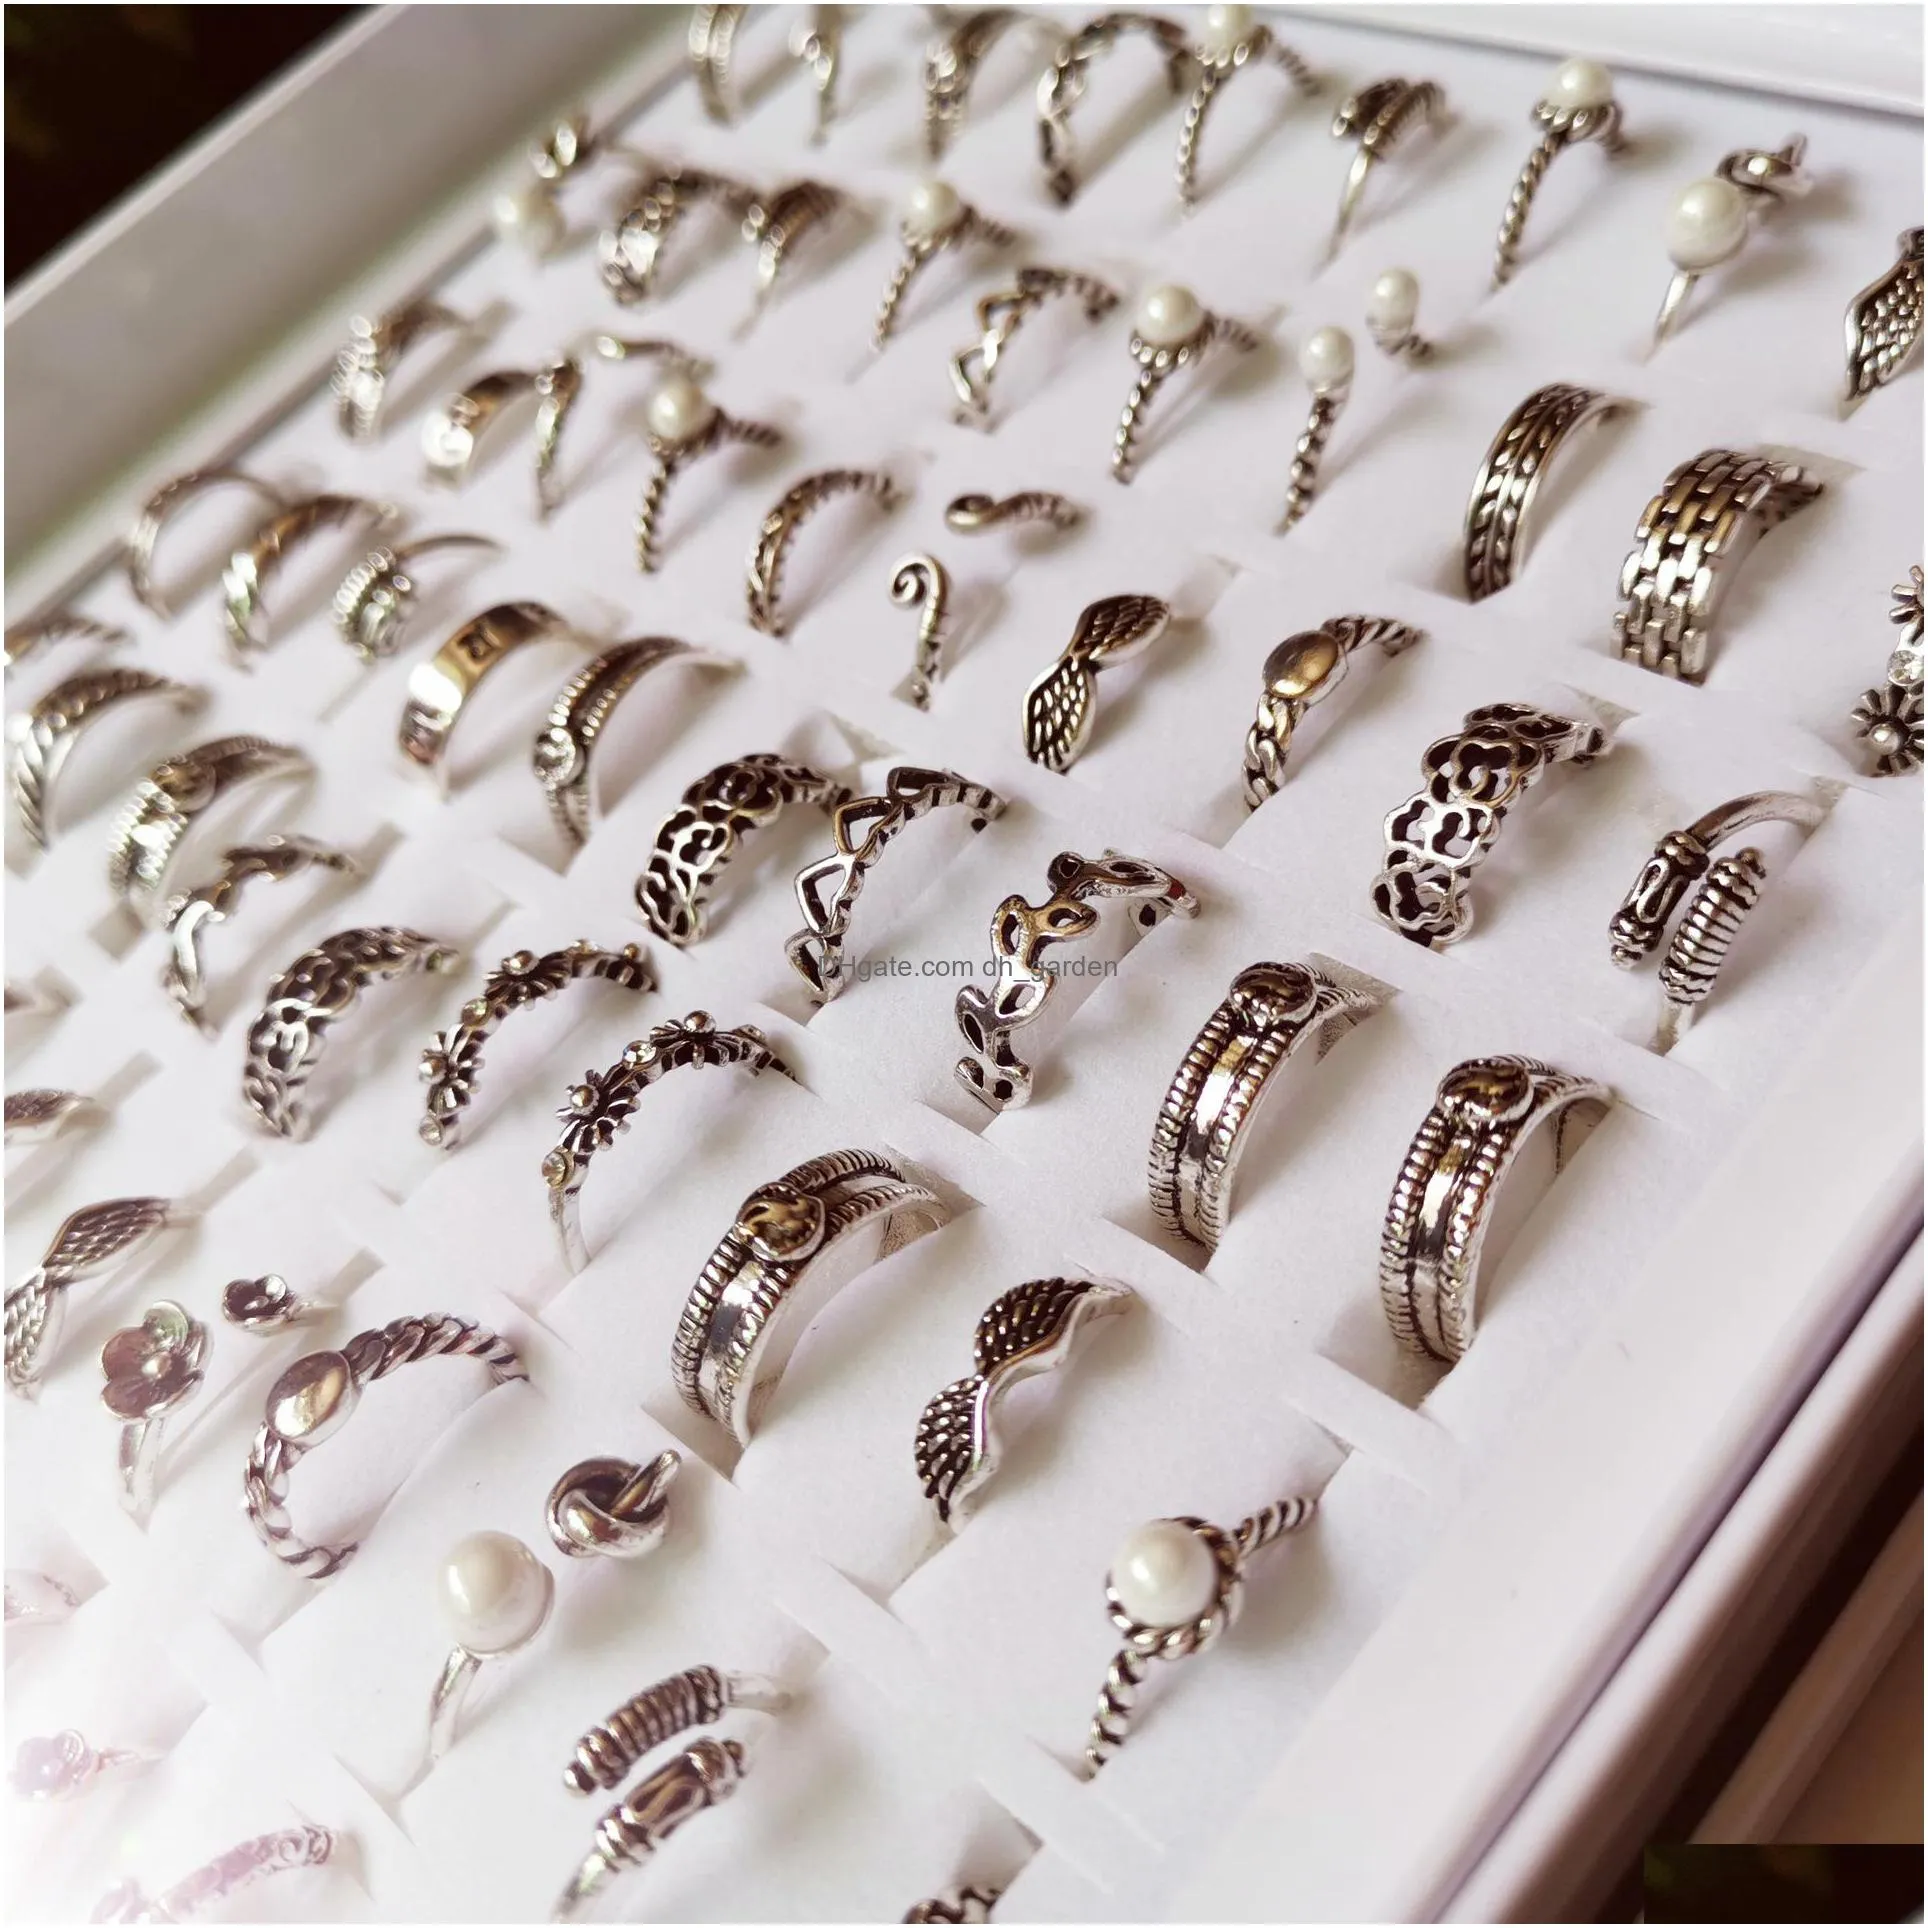 zhang 50pcs / batch mix and match bohemian rings antique antique silver plated jewelry rings wholesale and batch delivery